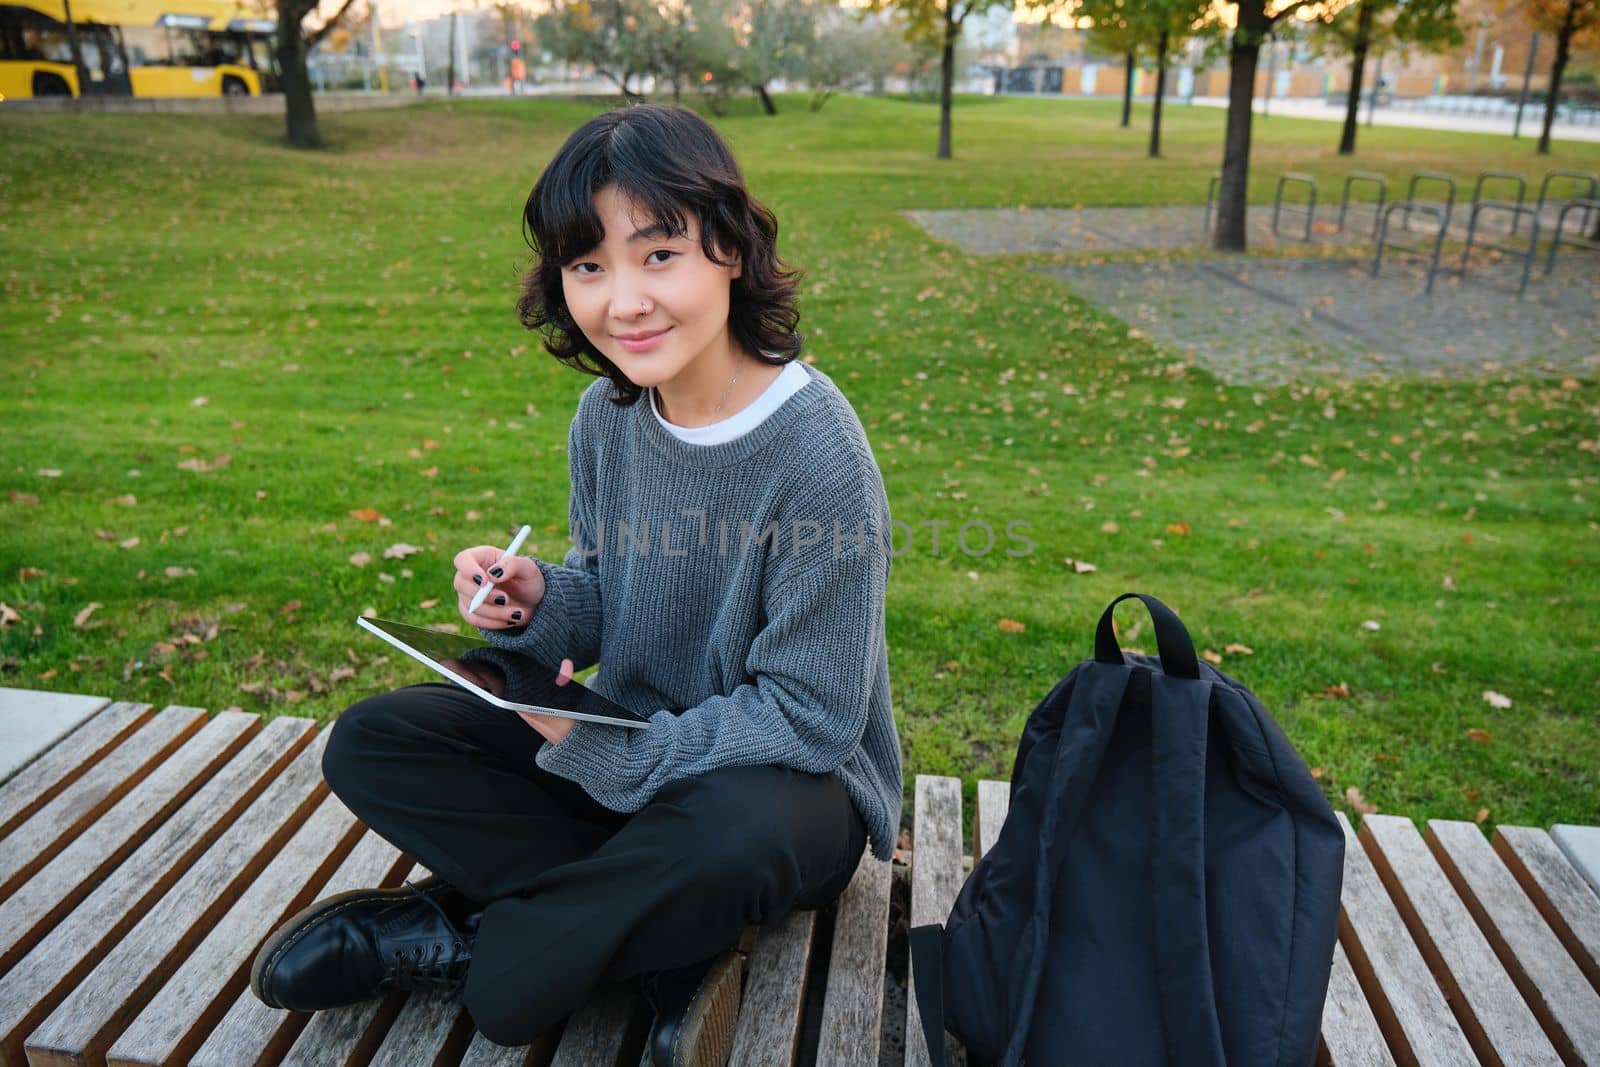 Young asian girl with graphic pencil and tablet, sits in park on bench, draws scatches, does her homework outdoors.